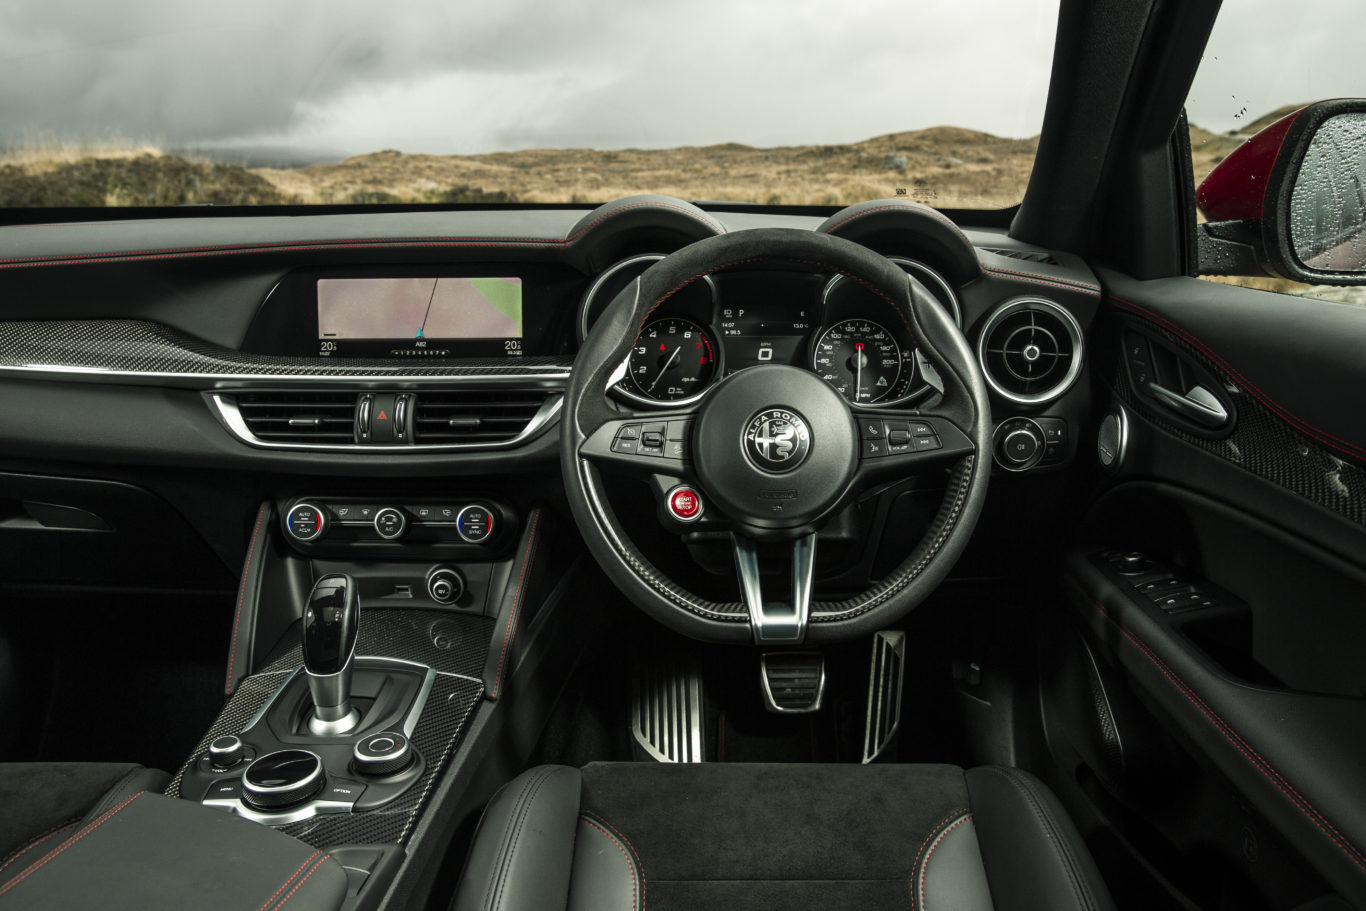 The interior fo the Stelvio is a mixture of the good and the bad